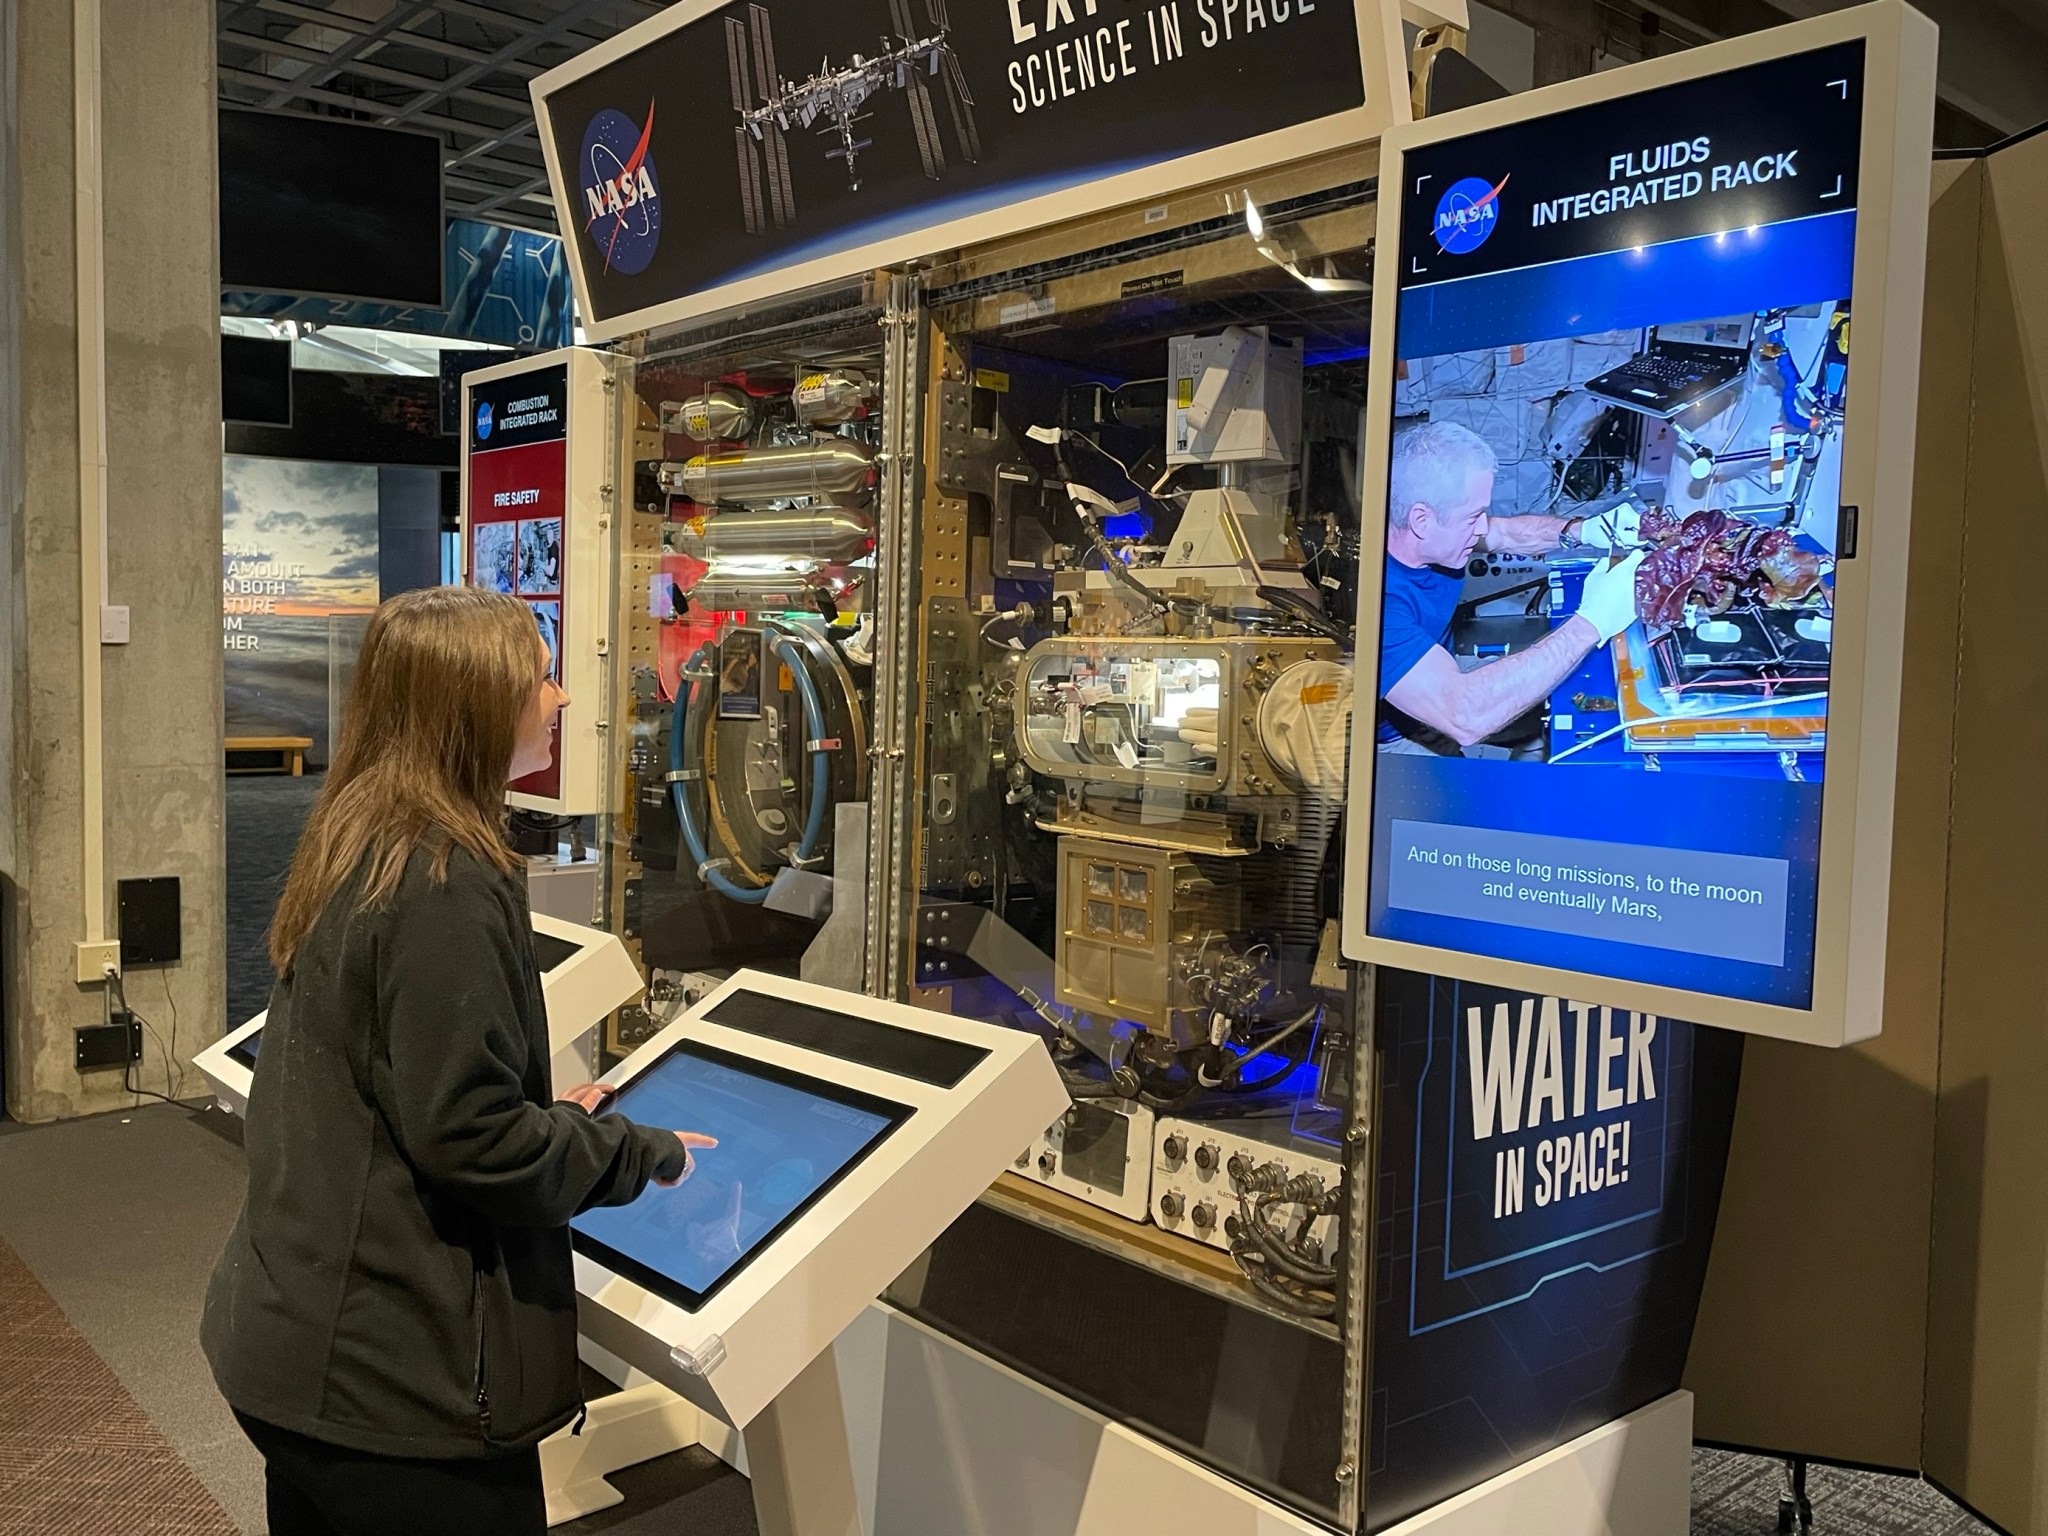 A woman visitor smiles as she operates an interactive space science exhibit using a colorful touch screen. Real International Space Station hardware can be seen between two video monitors in front of her and next to the exhibit.